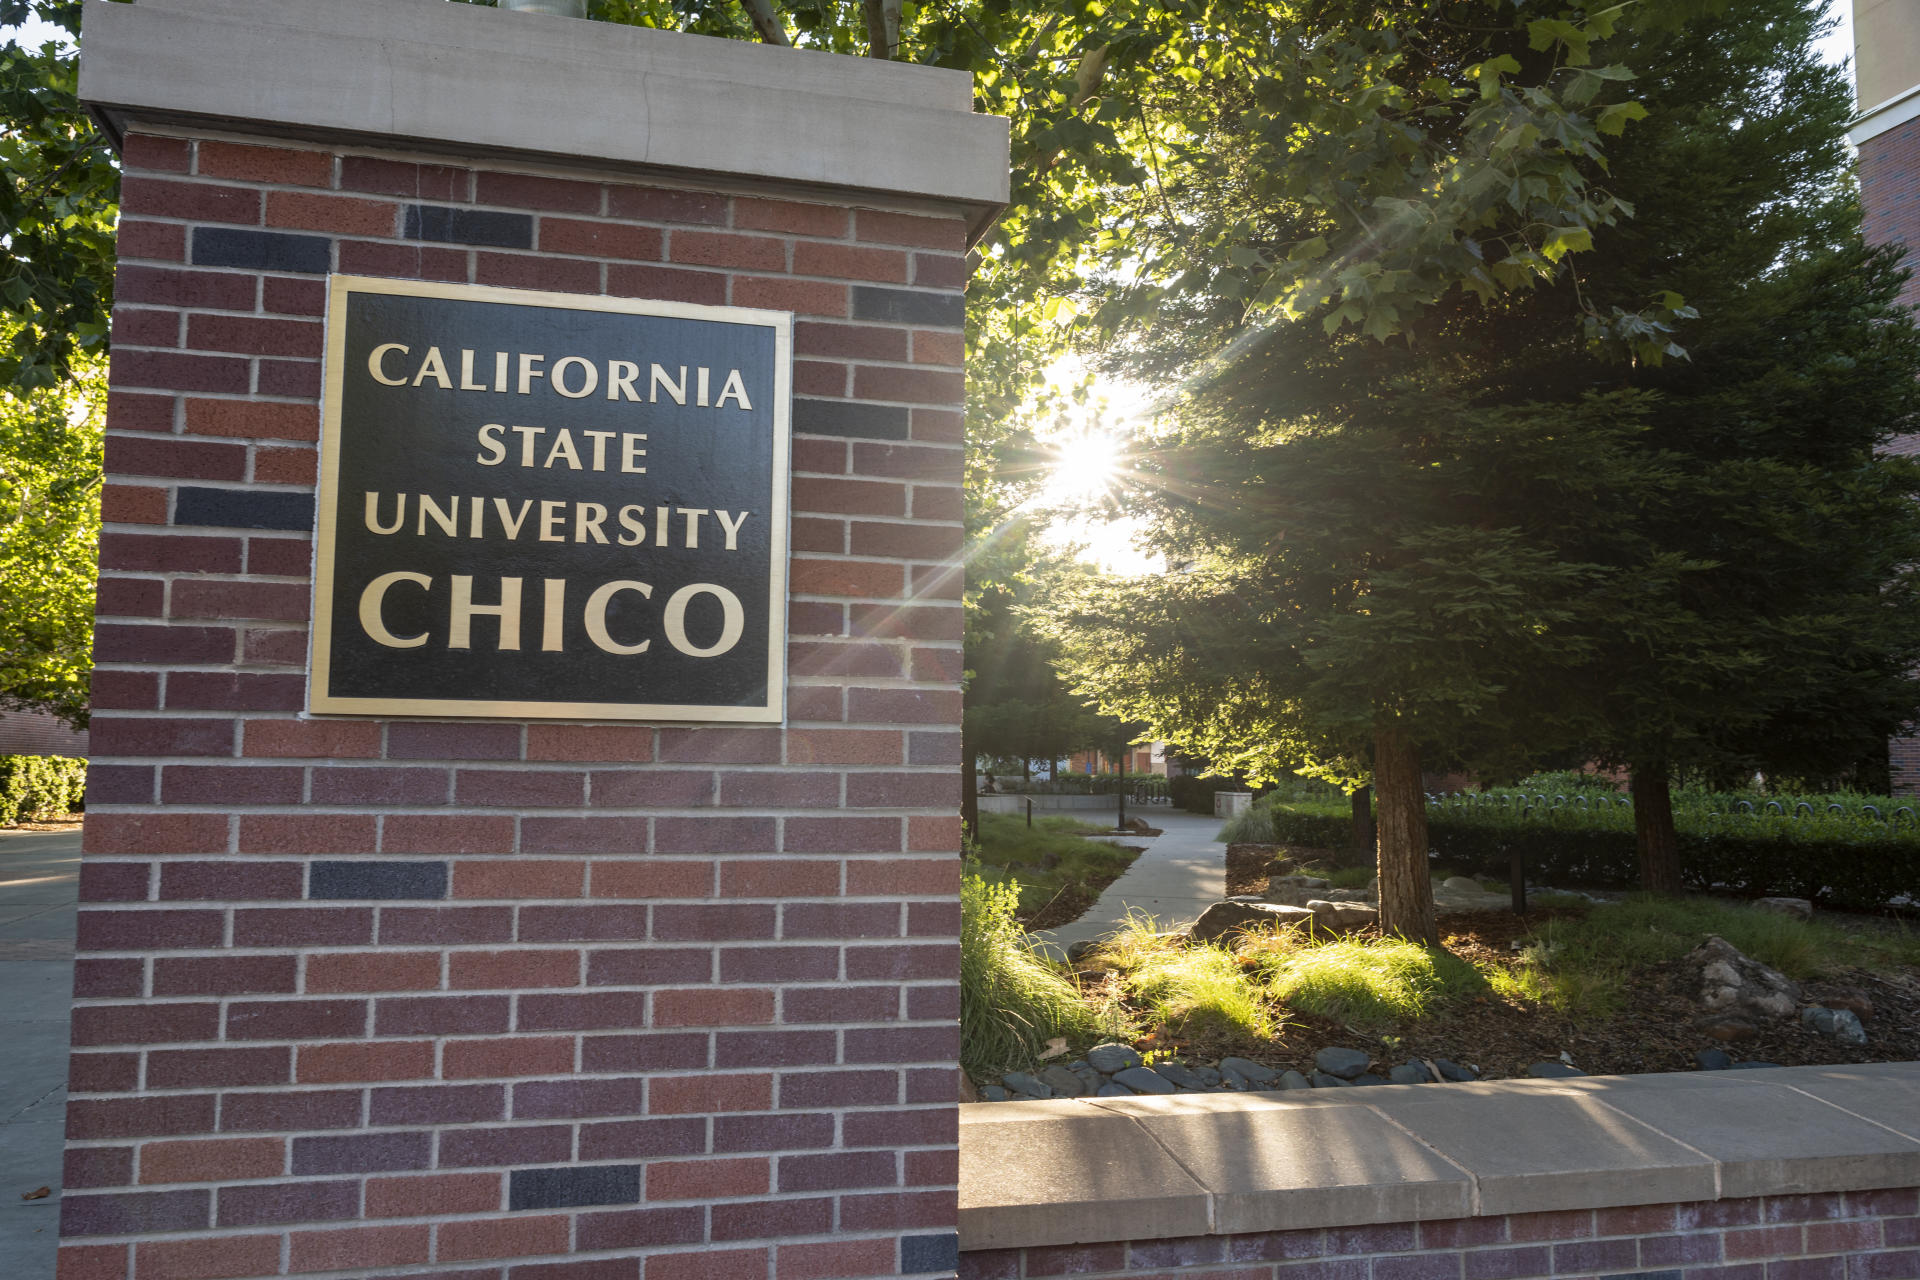 The sun shines through branches and leaves at one of the entrances to Chico State.